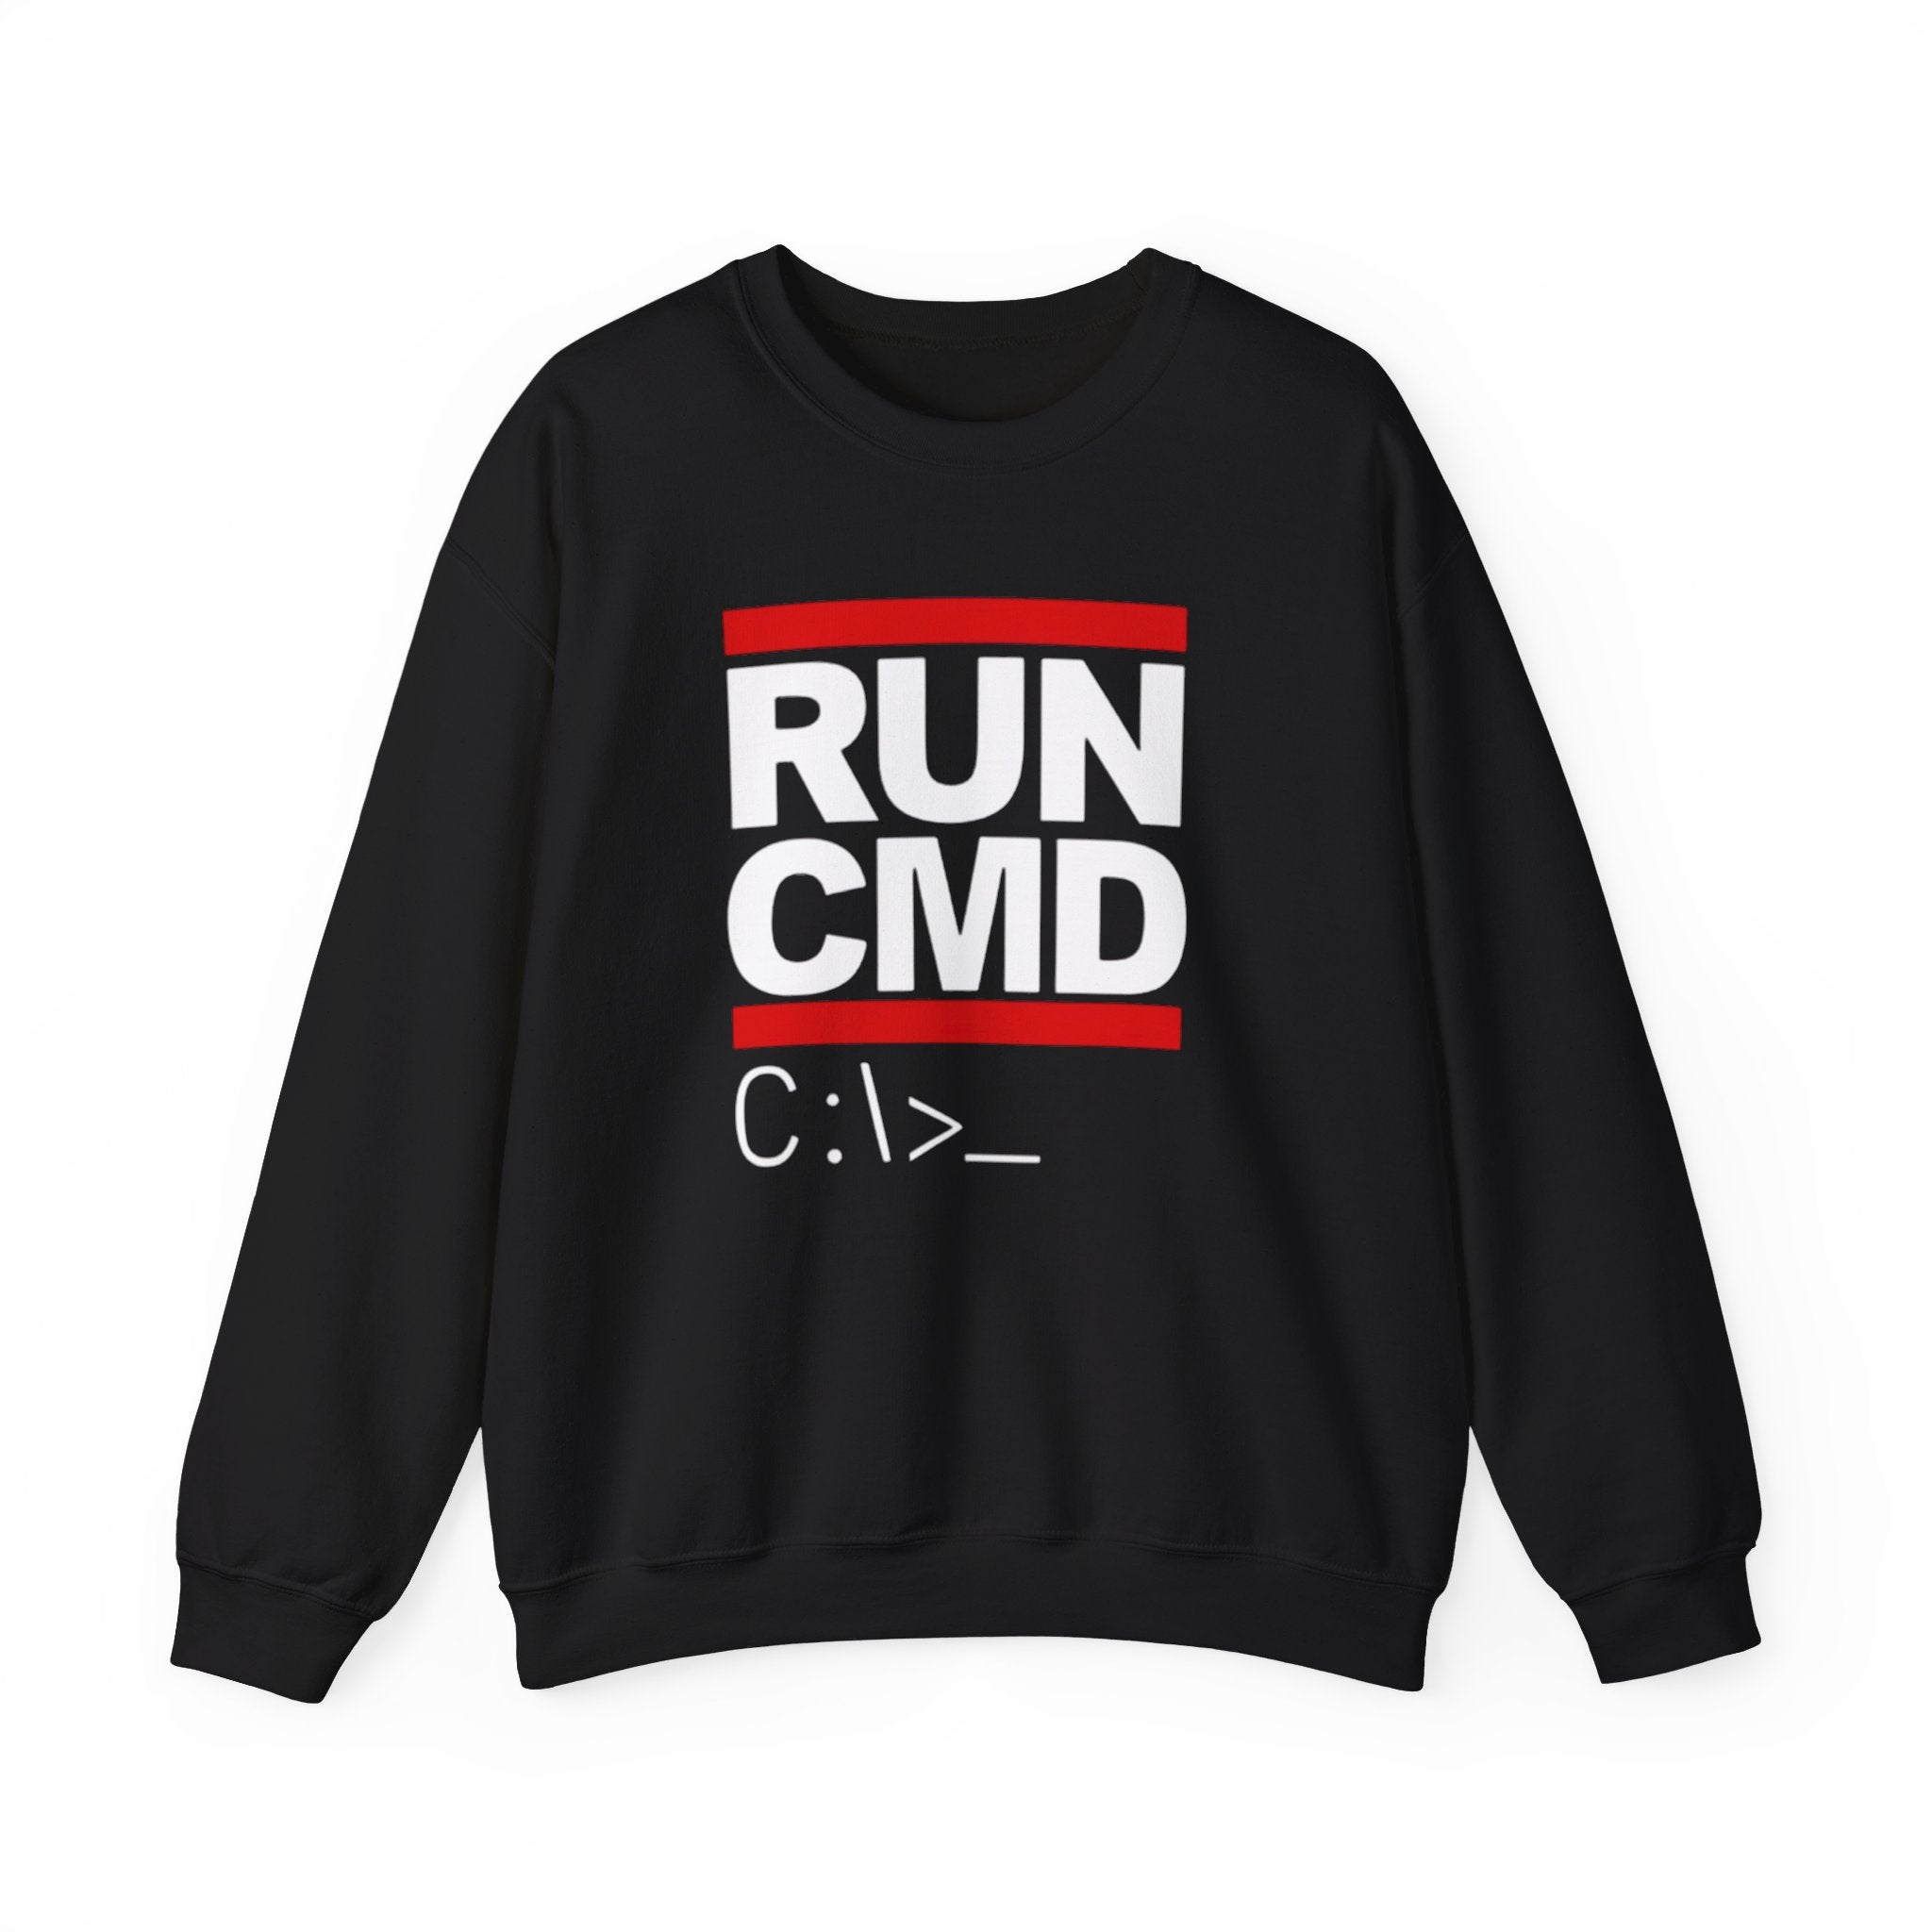 A RUN CMD - Sweatshirt offering ultimate comfort, featuring "RUN CMD" in bold white and red letters with "C:\>" below it.